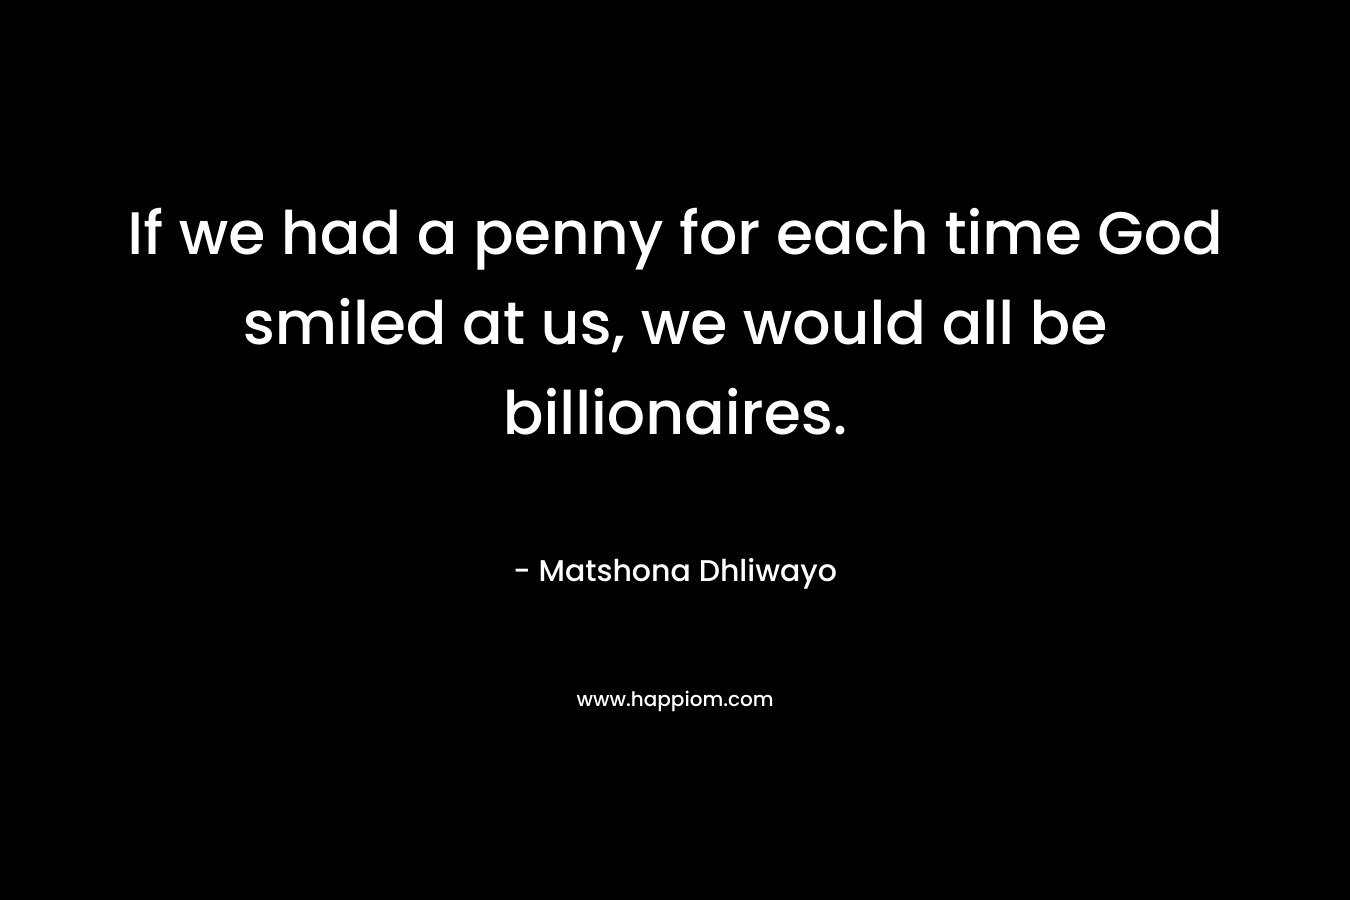 If we had a penny for each time God smiled at us, we would all be billionaires.